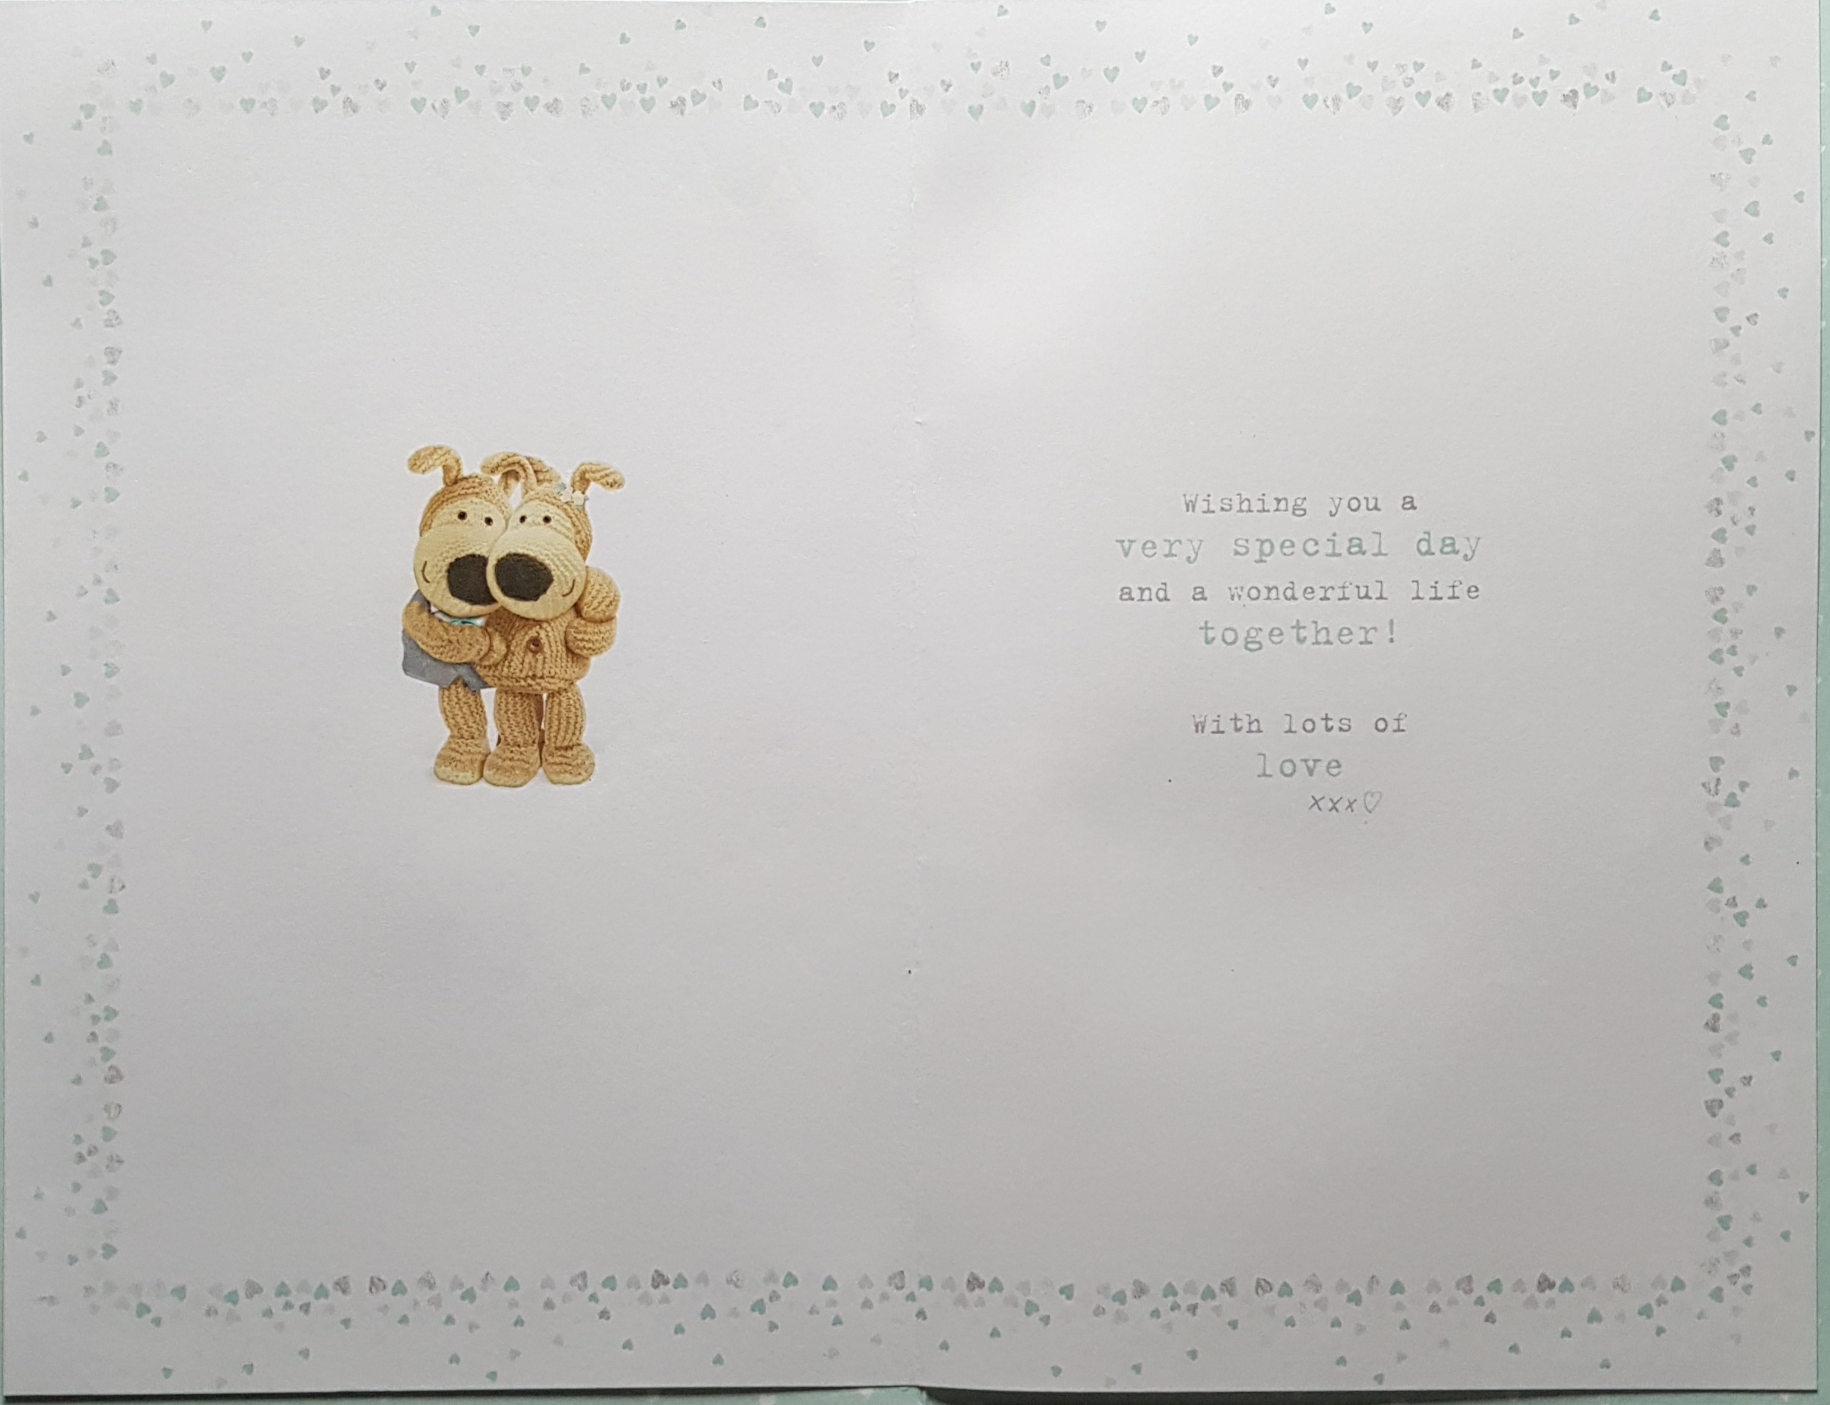 Wedding Card - Cute Dog Teddies Surrounded by Little White Hearts